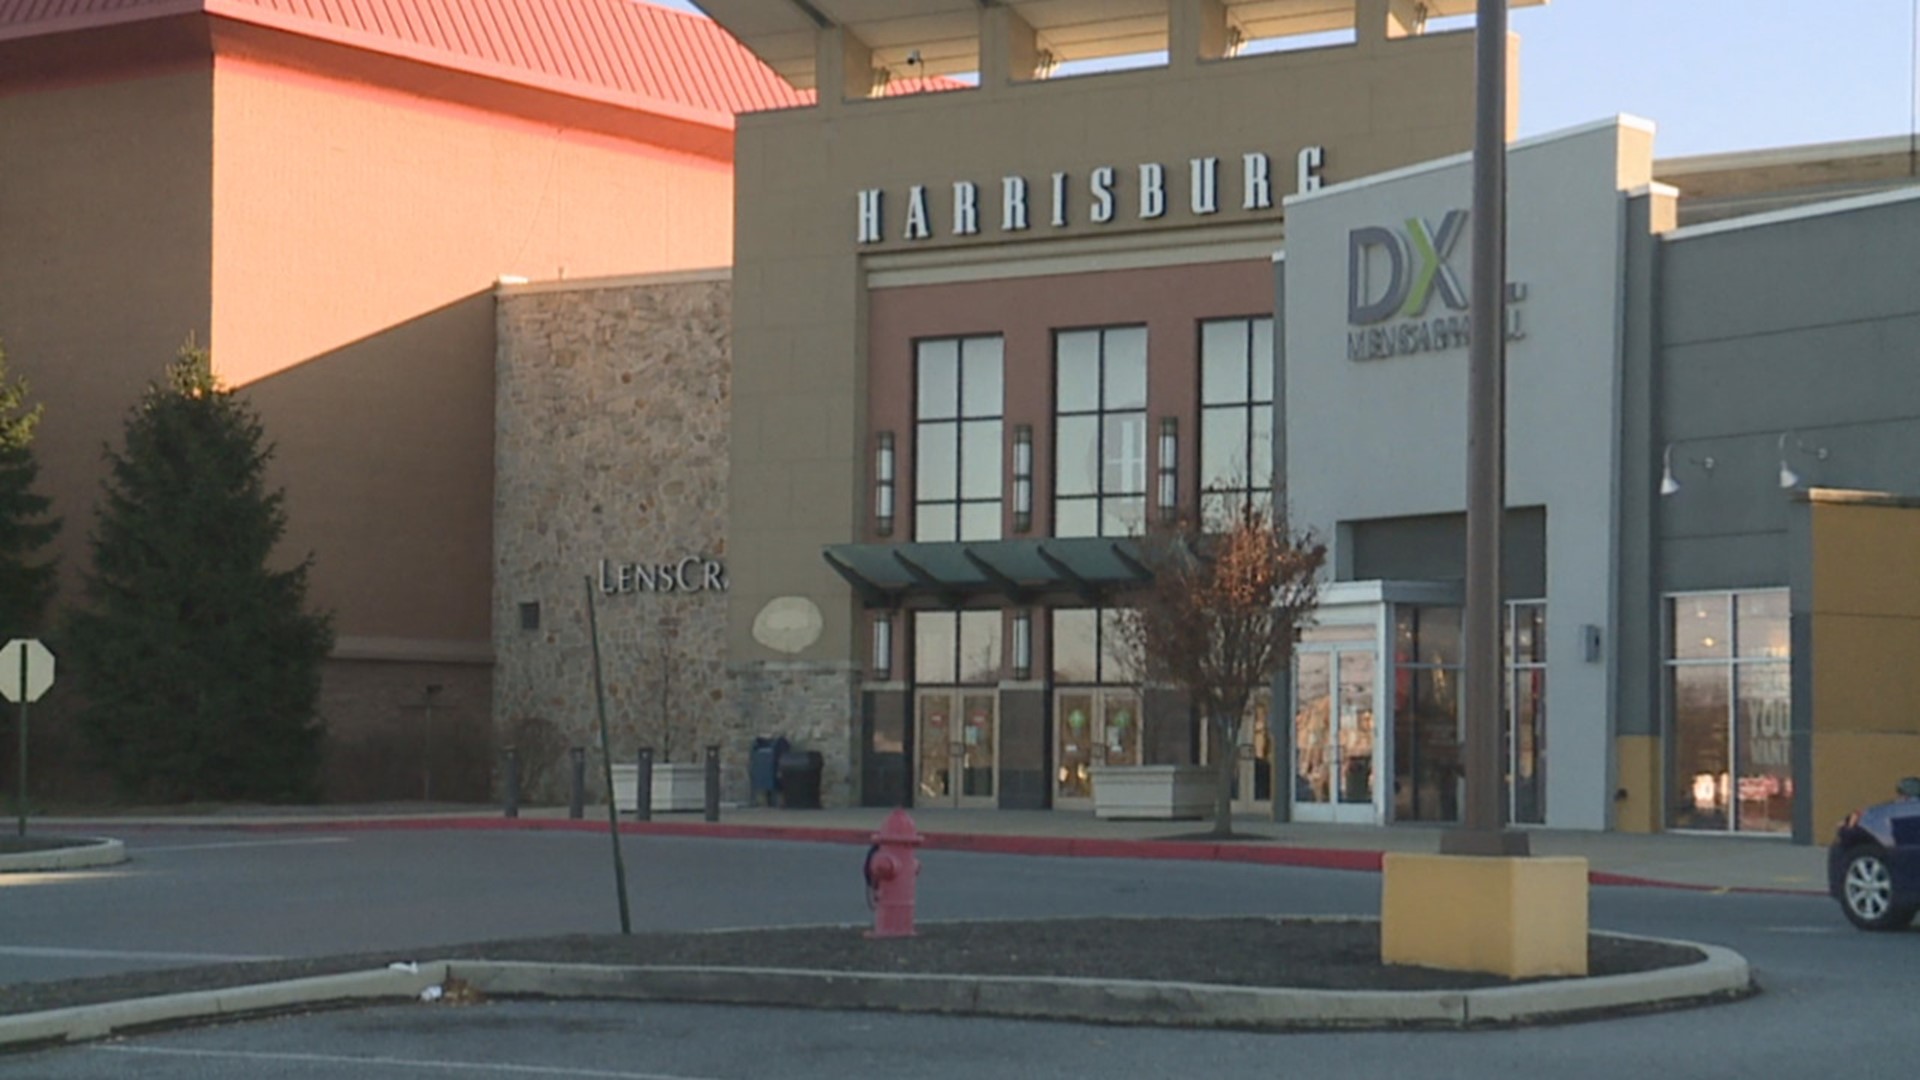 Store owners at the Harrisburg Mall received a letter from the mall's owners saying they must vacate the premises by January 31, 2024.